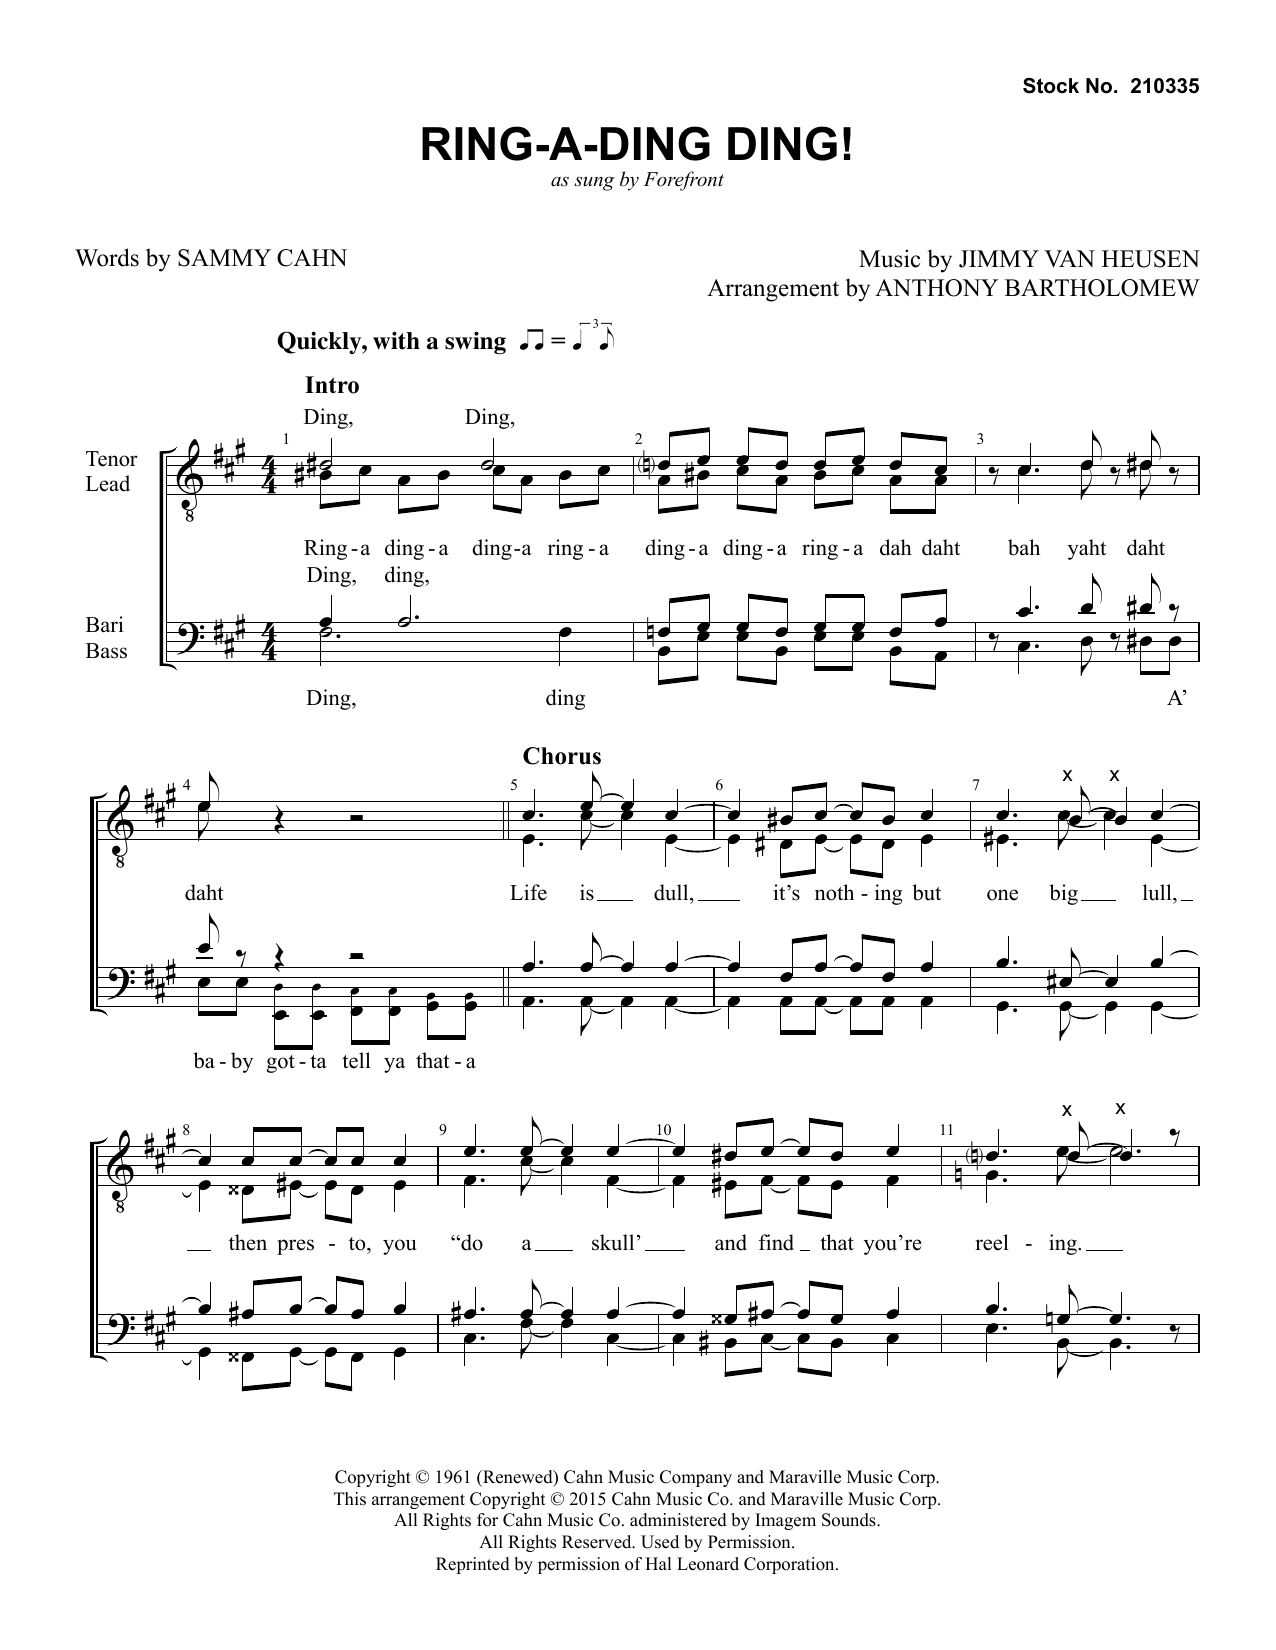 Forefront Ring-a-Ding Ding (arr. Anthony Bartholomew) sheet music notes and chords. Download Printable PDF.